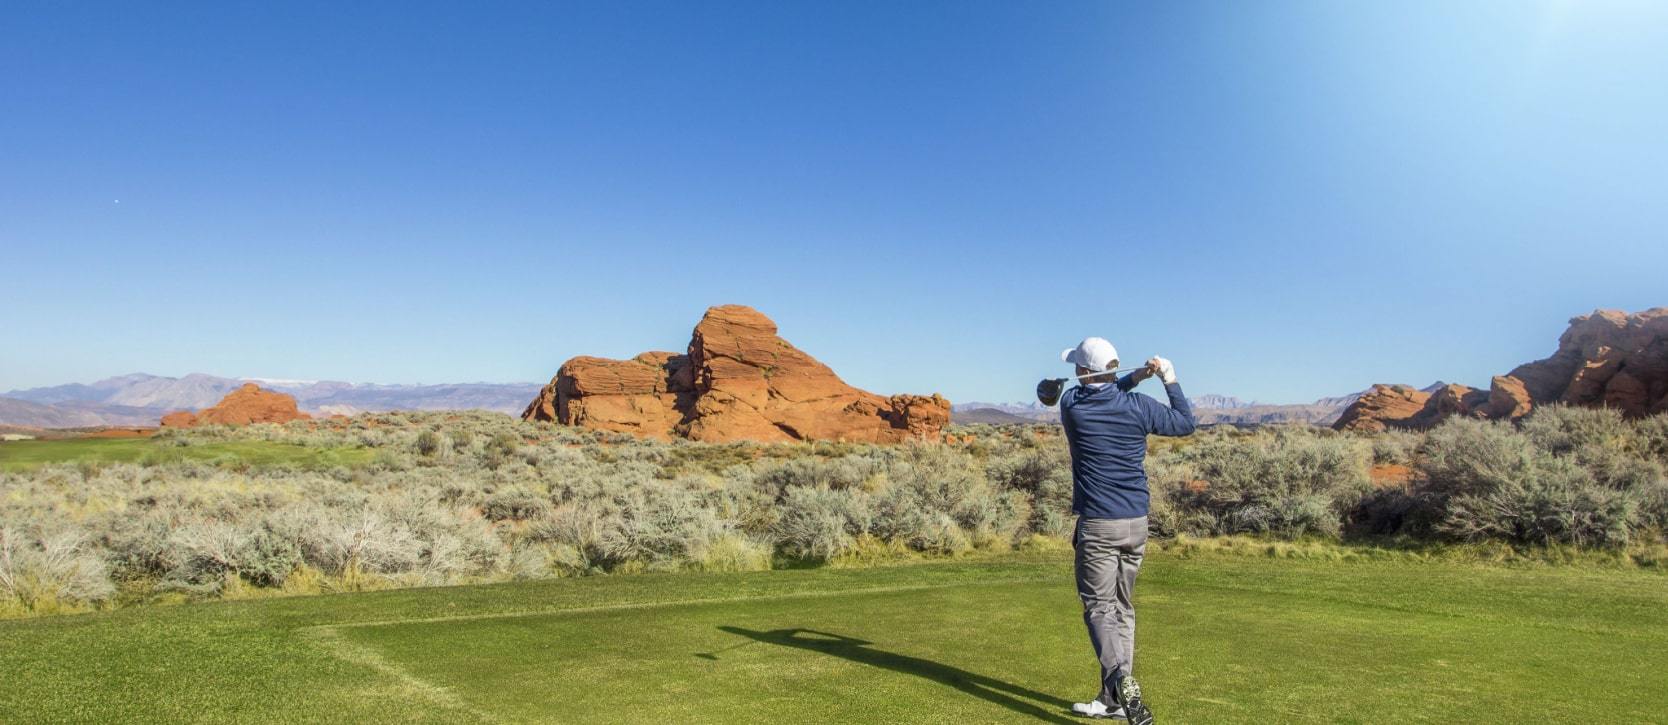 Man golfing on a golf course in Southern Utah